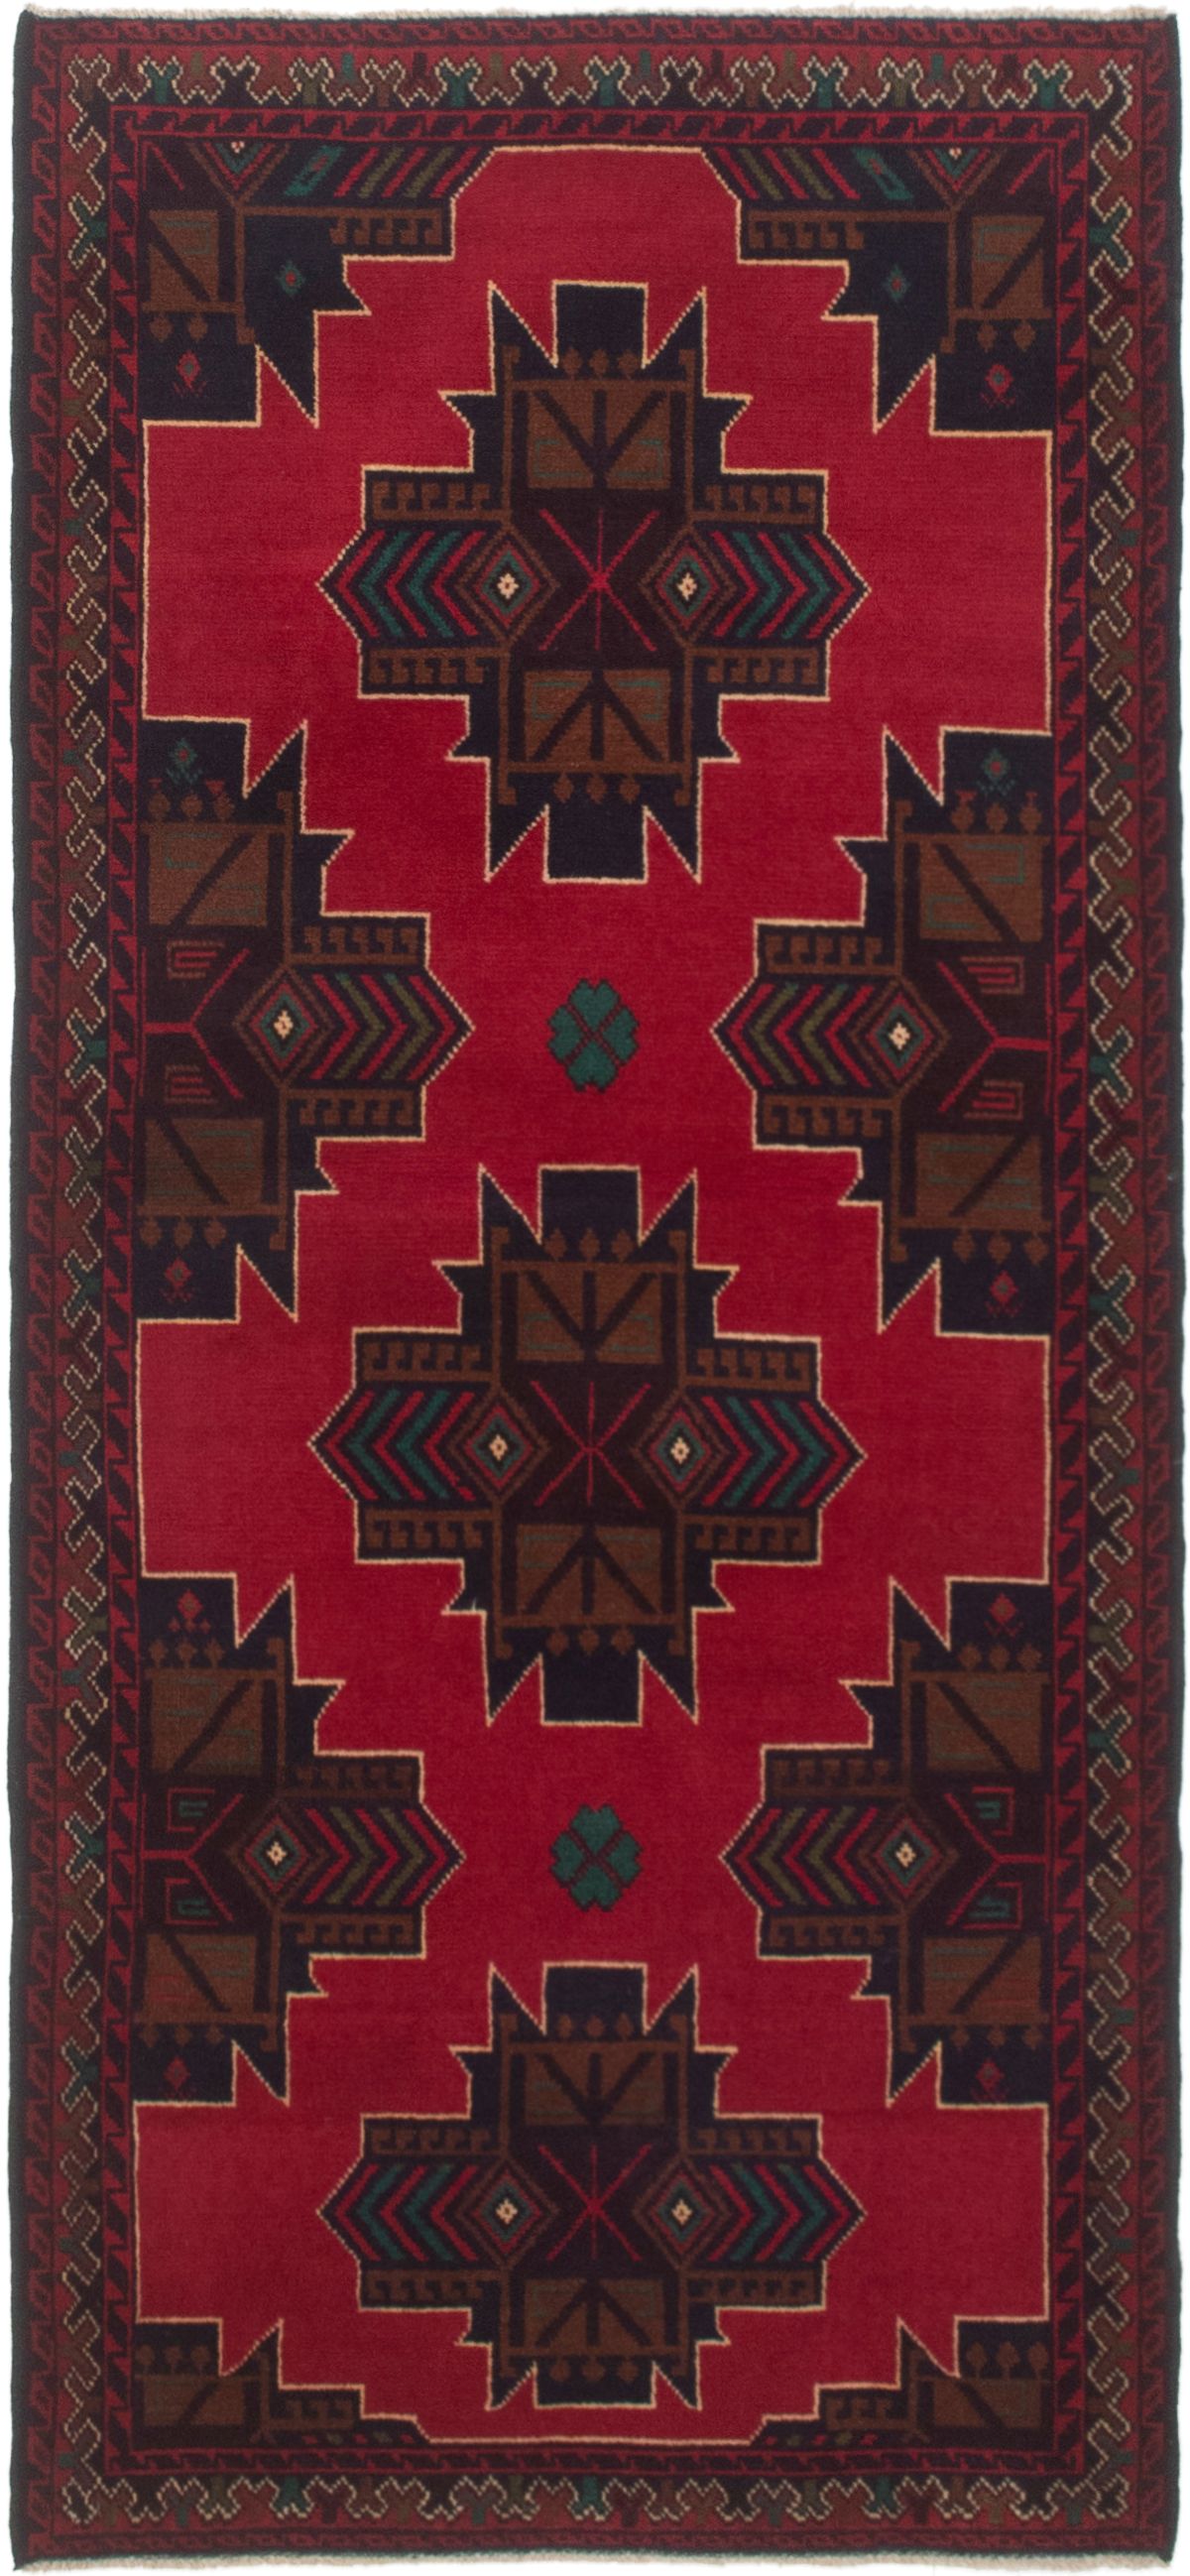 Hand-knotted Teimani Red Wool Rug 2'11" x 6'4"  Size: 2'11" x 6'4"  